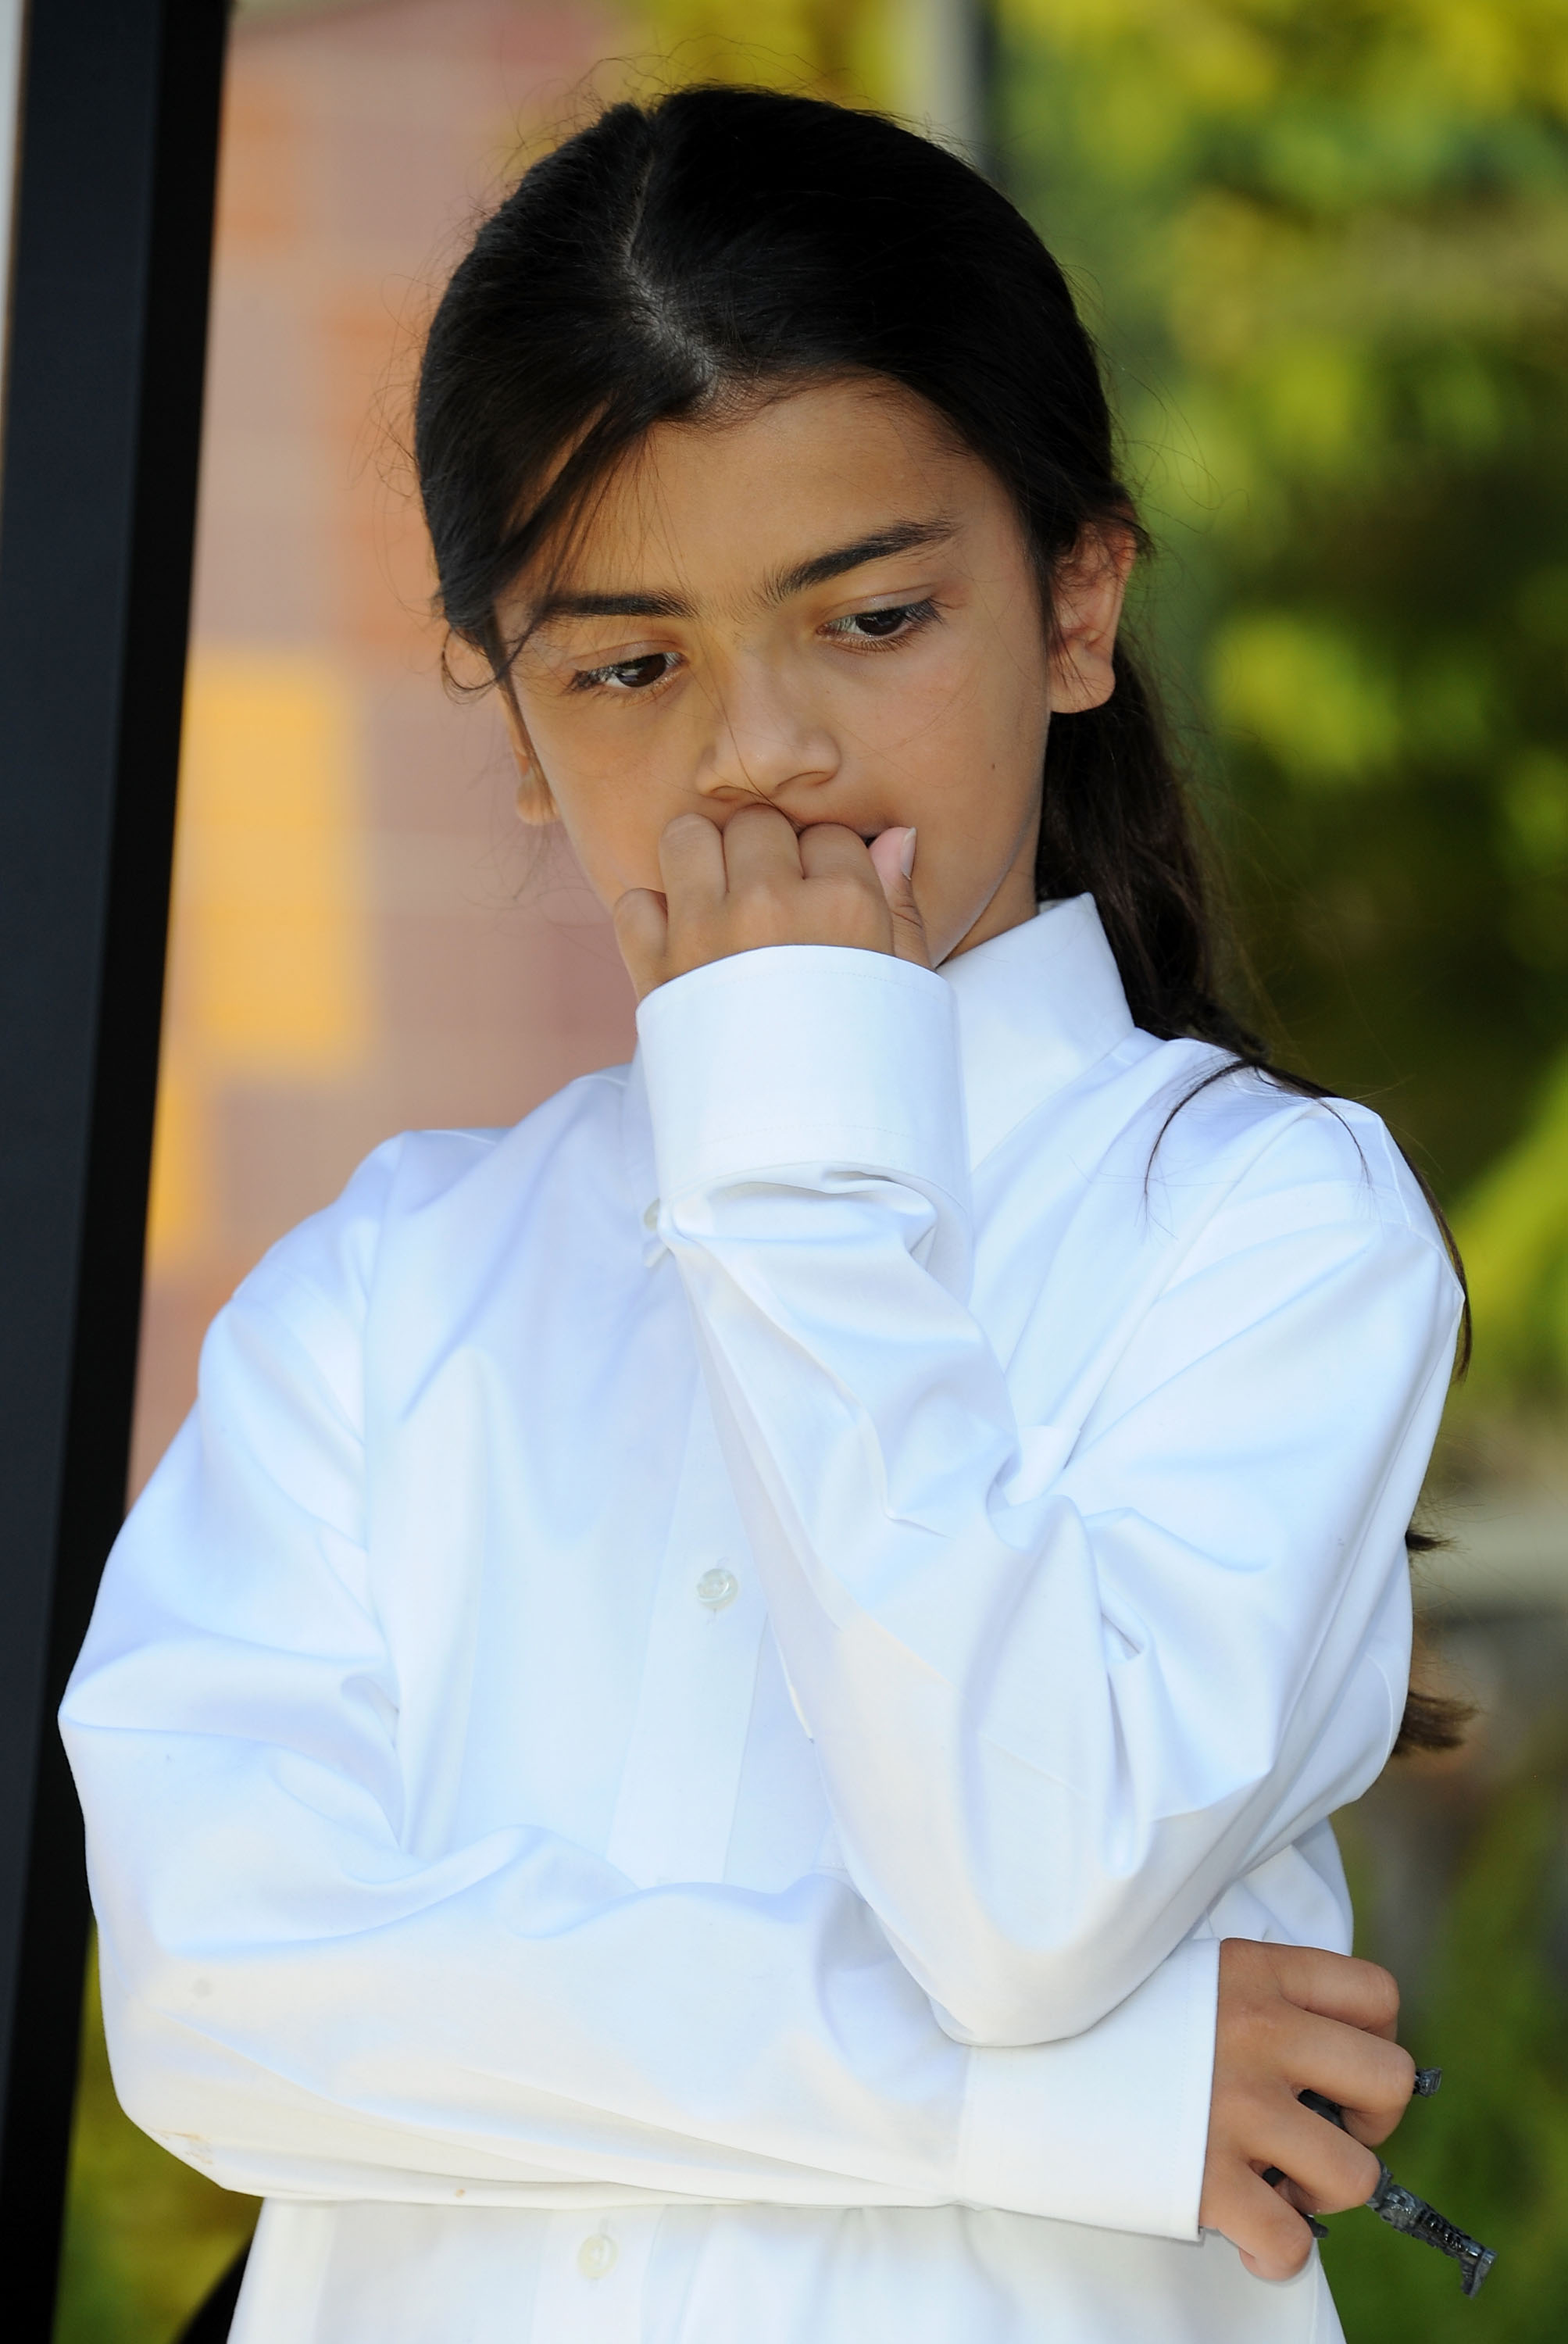 Blanket Jackson at a Children's Hospital Artwork Donation ceremony honoring Michael Jackson in Los Angeles, California on August 8, 2011 | Source: Getty Images